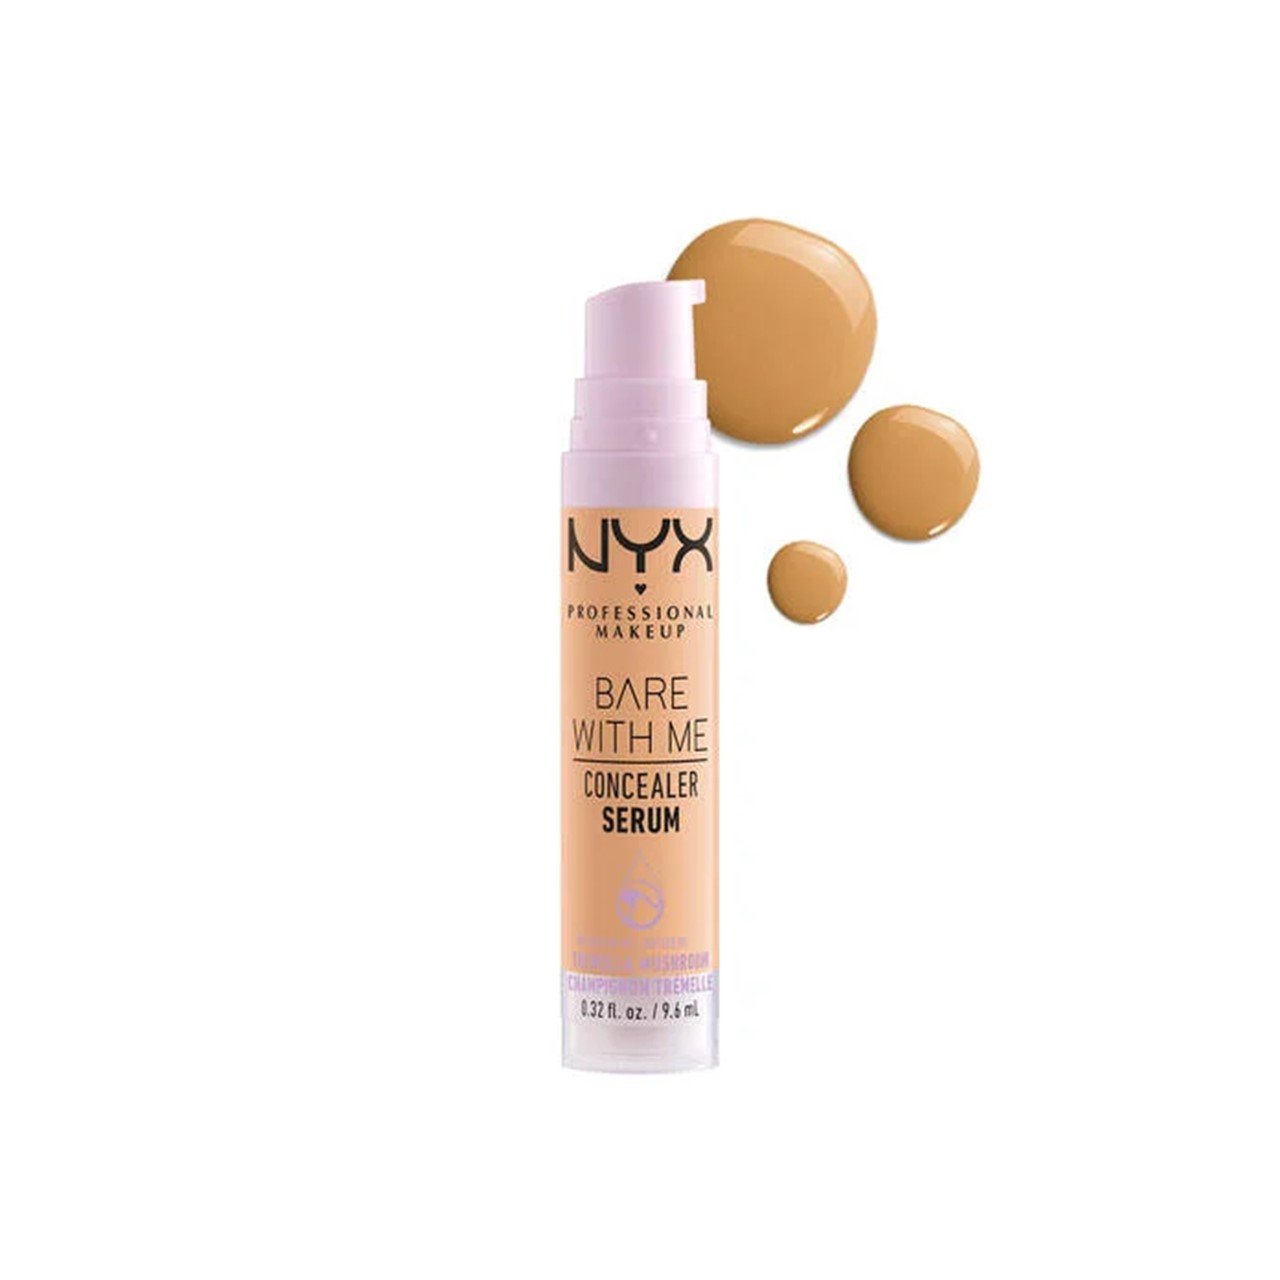 NYX Pro Makeup Bare With Me Concealer Serum 06 Tan 9.6ml